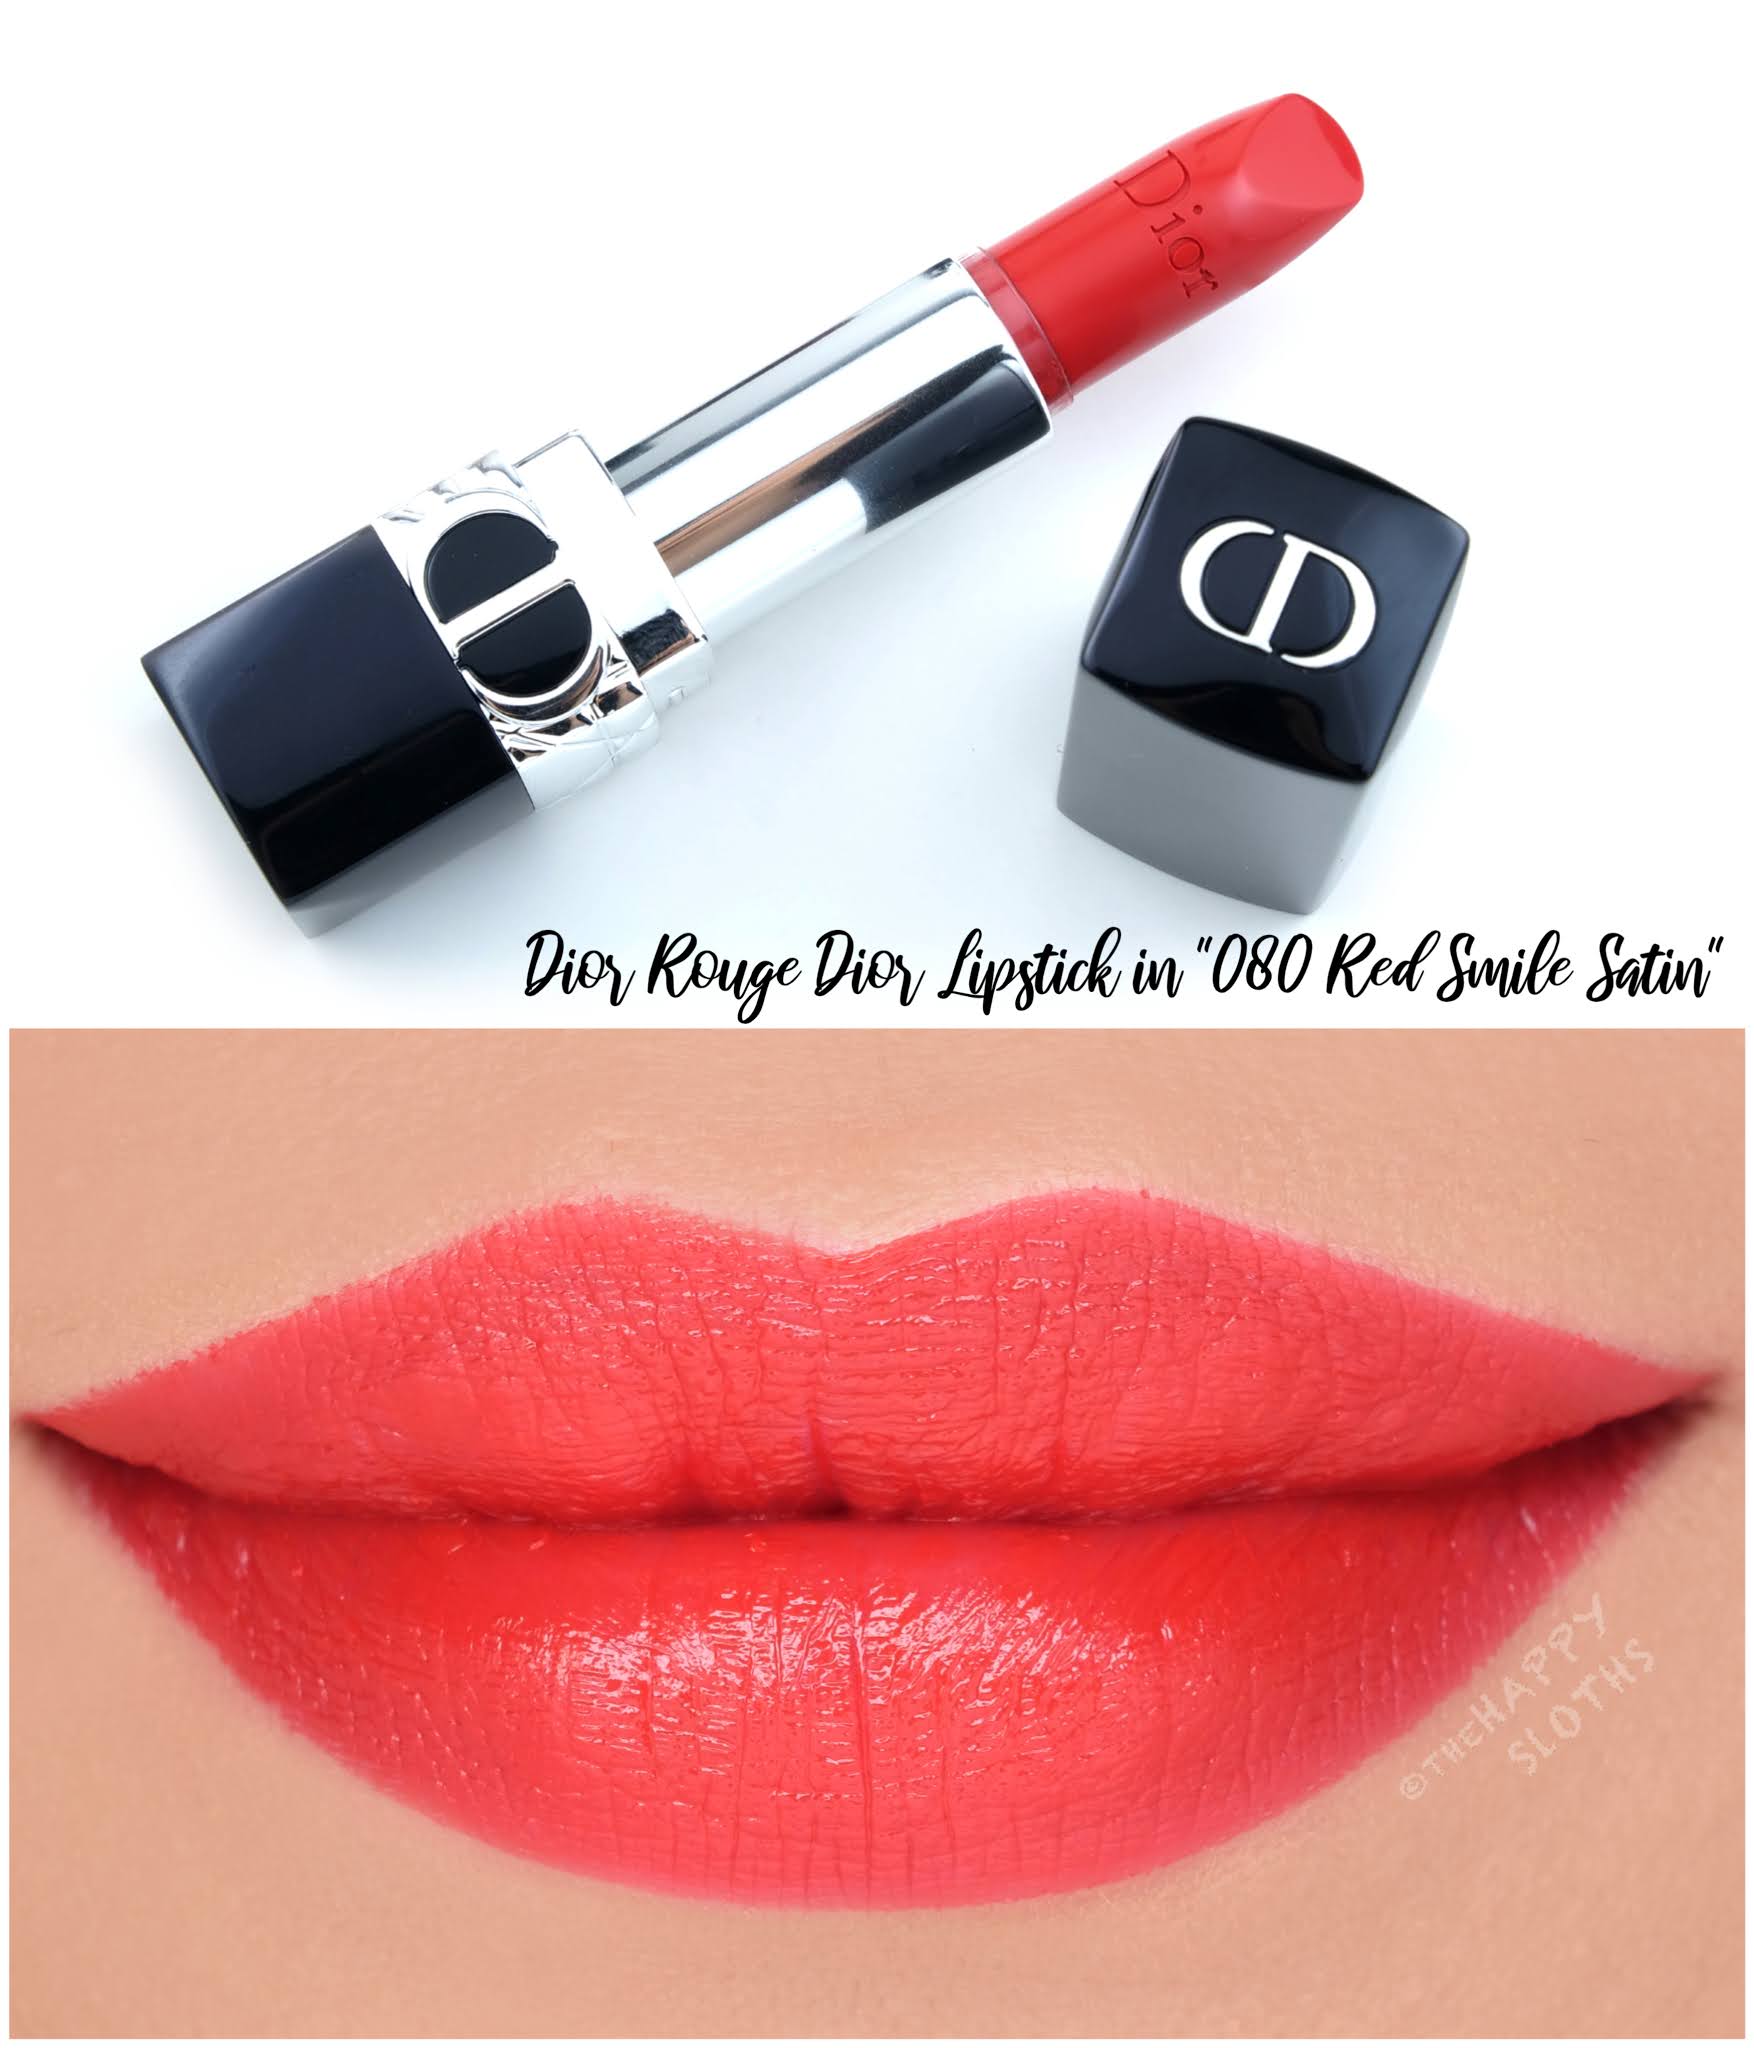 Dior | *NEW* Rouge Dior Refillable Lipstick in 080 Red Smile Satin: Review and Swatches